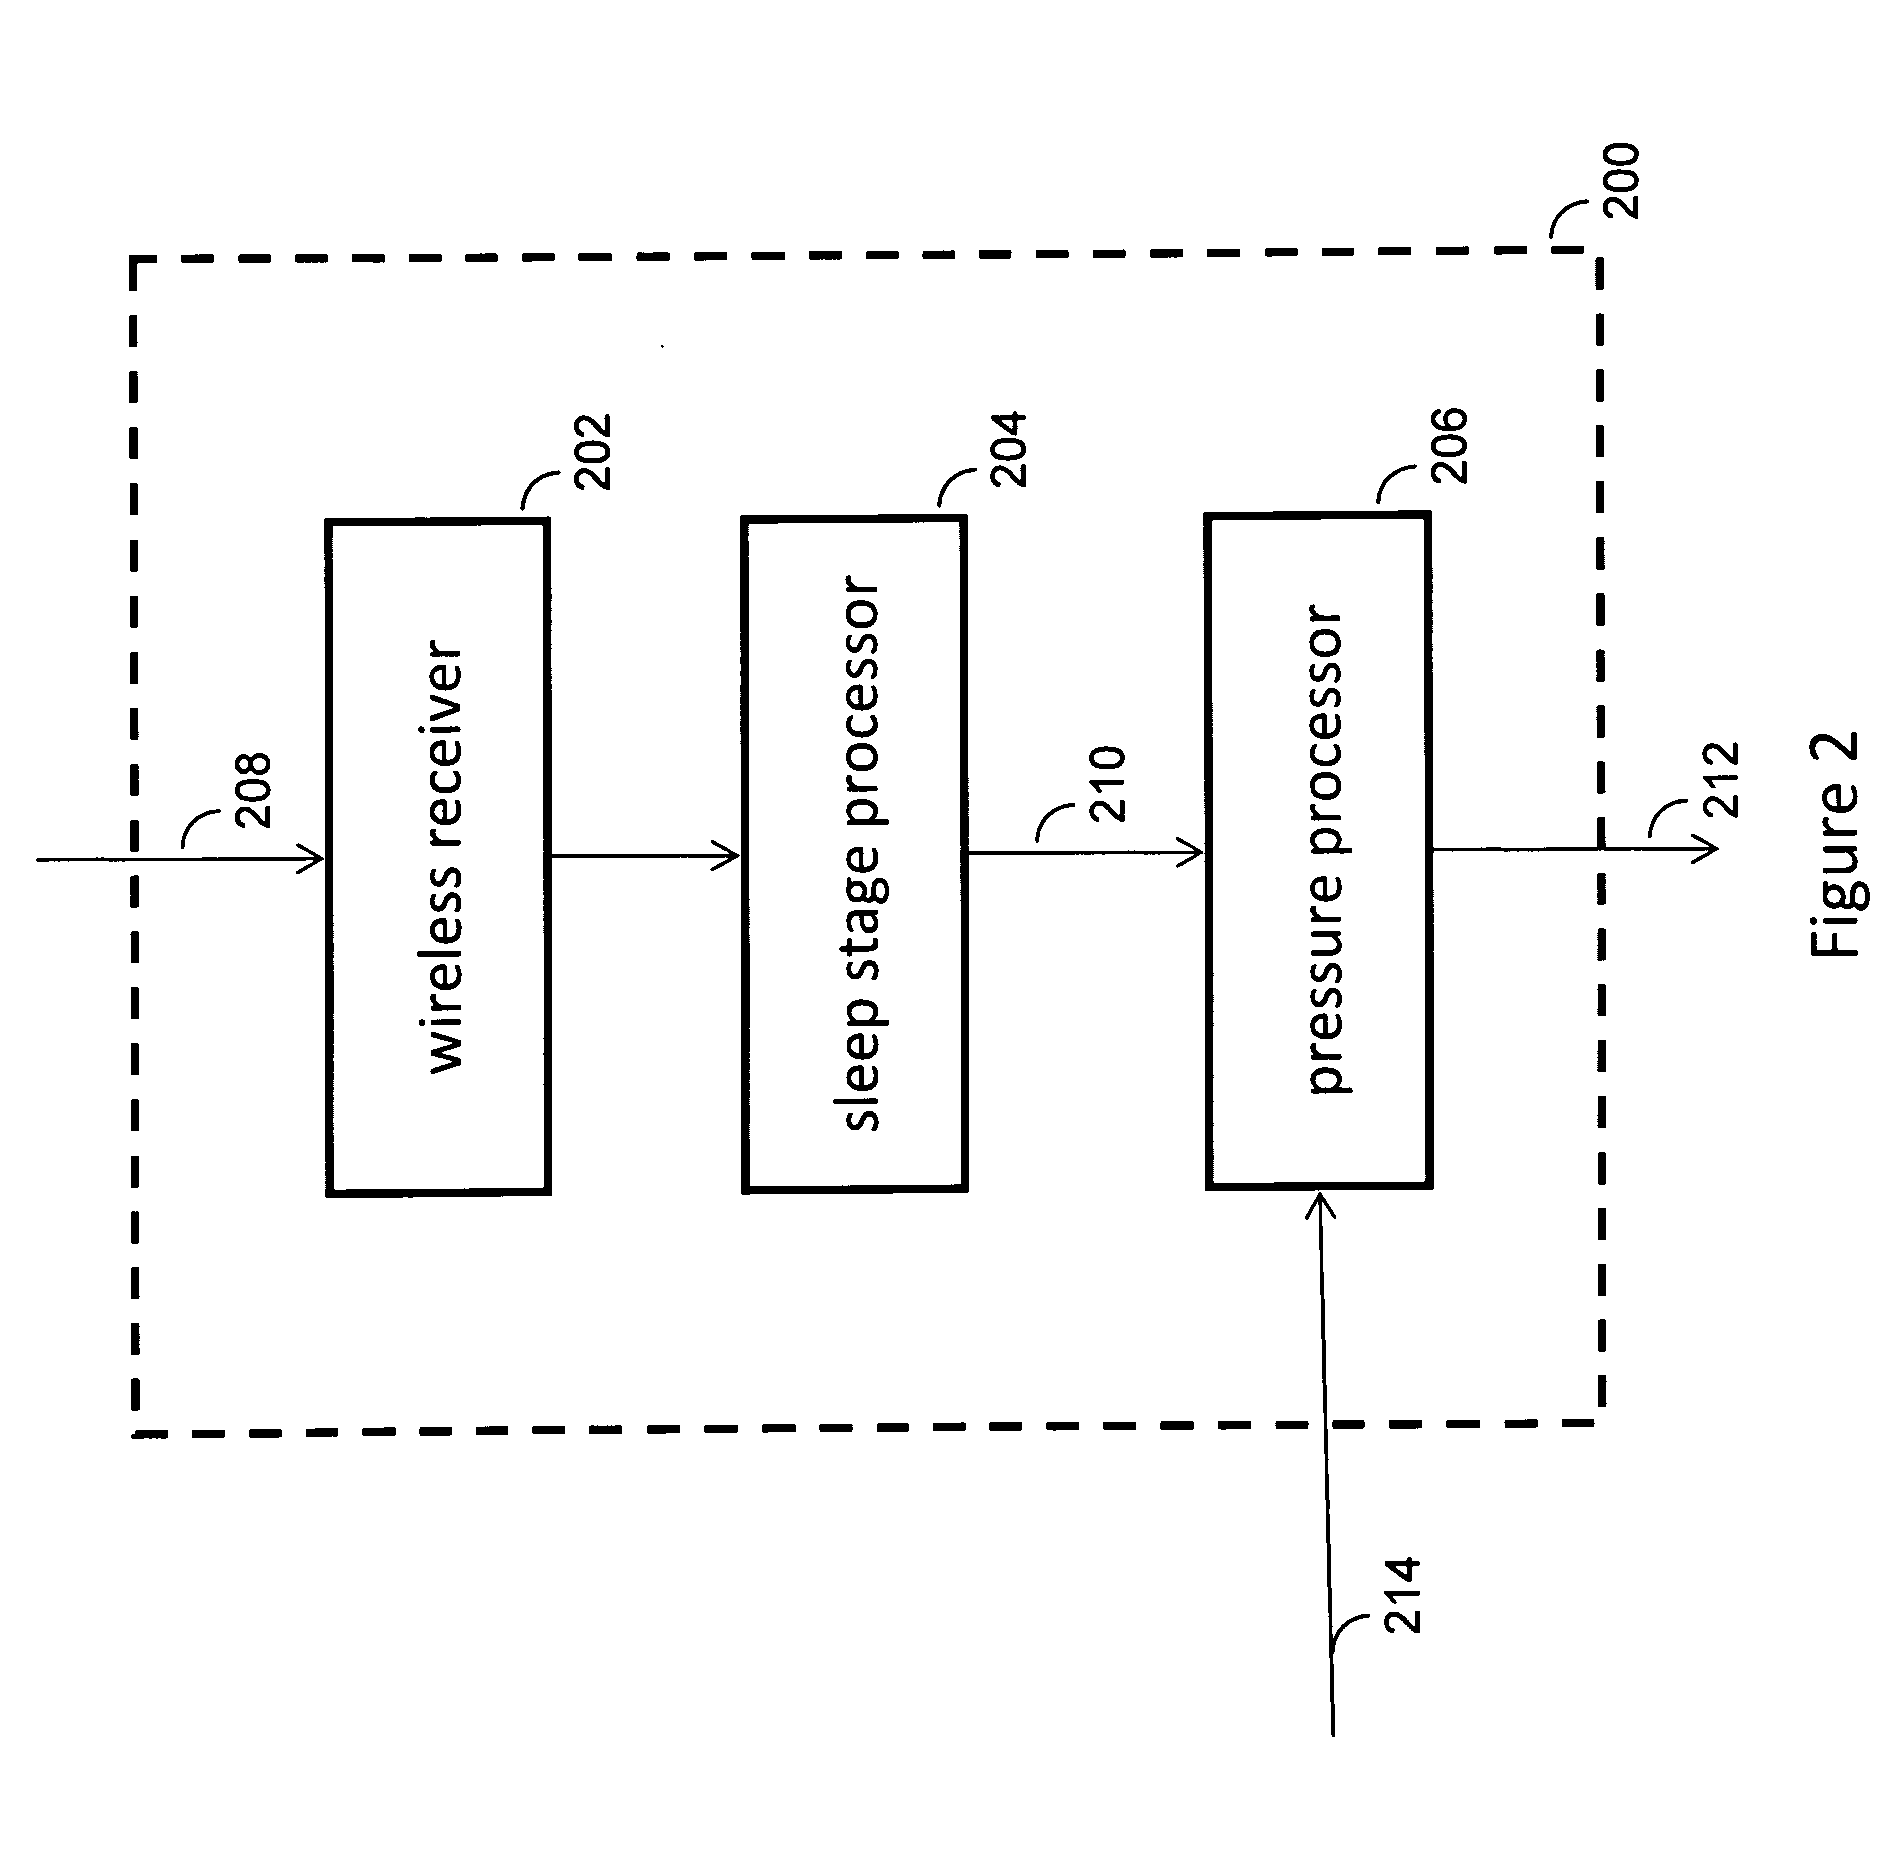 Pressure support system with dry electrode sleep staging device